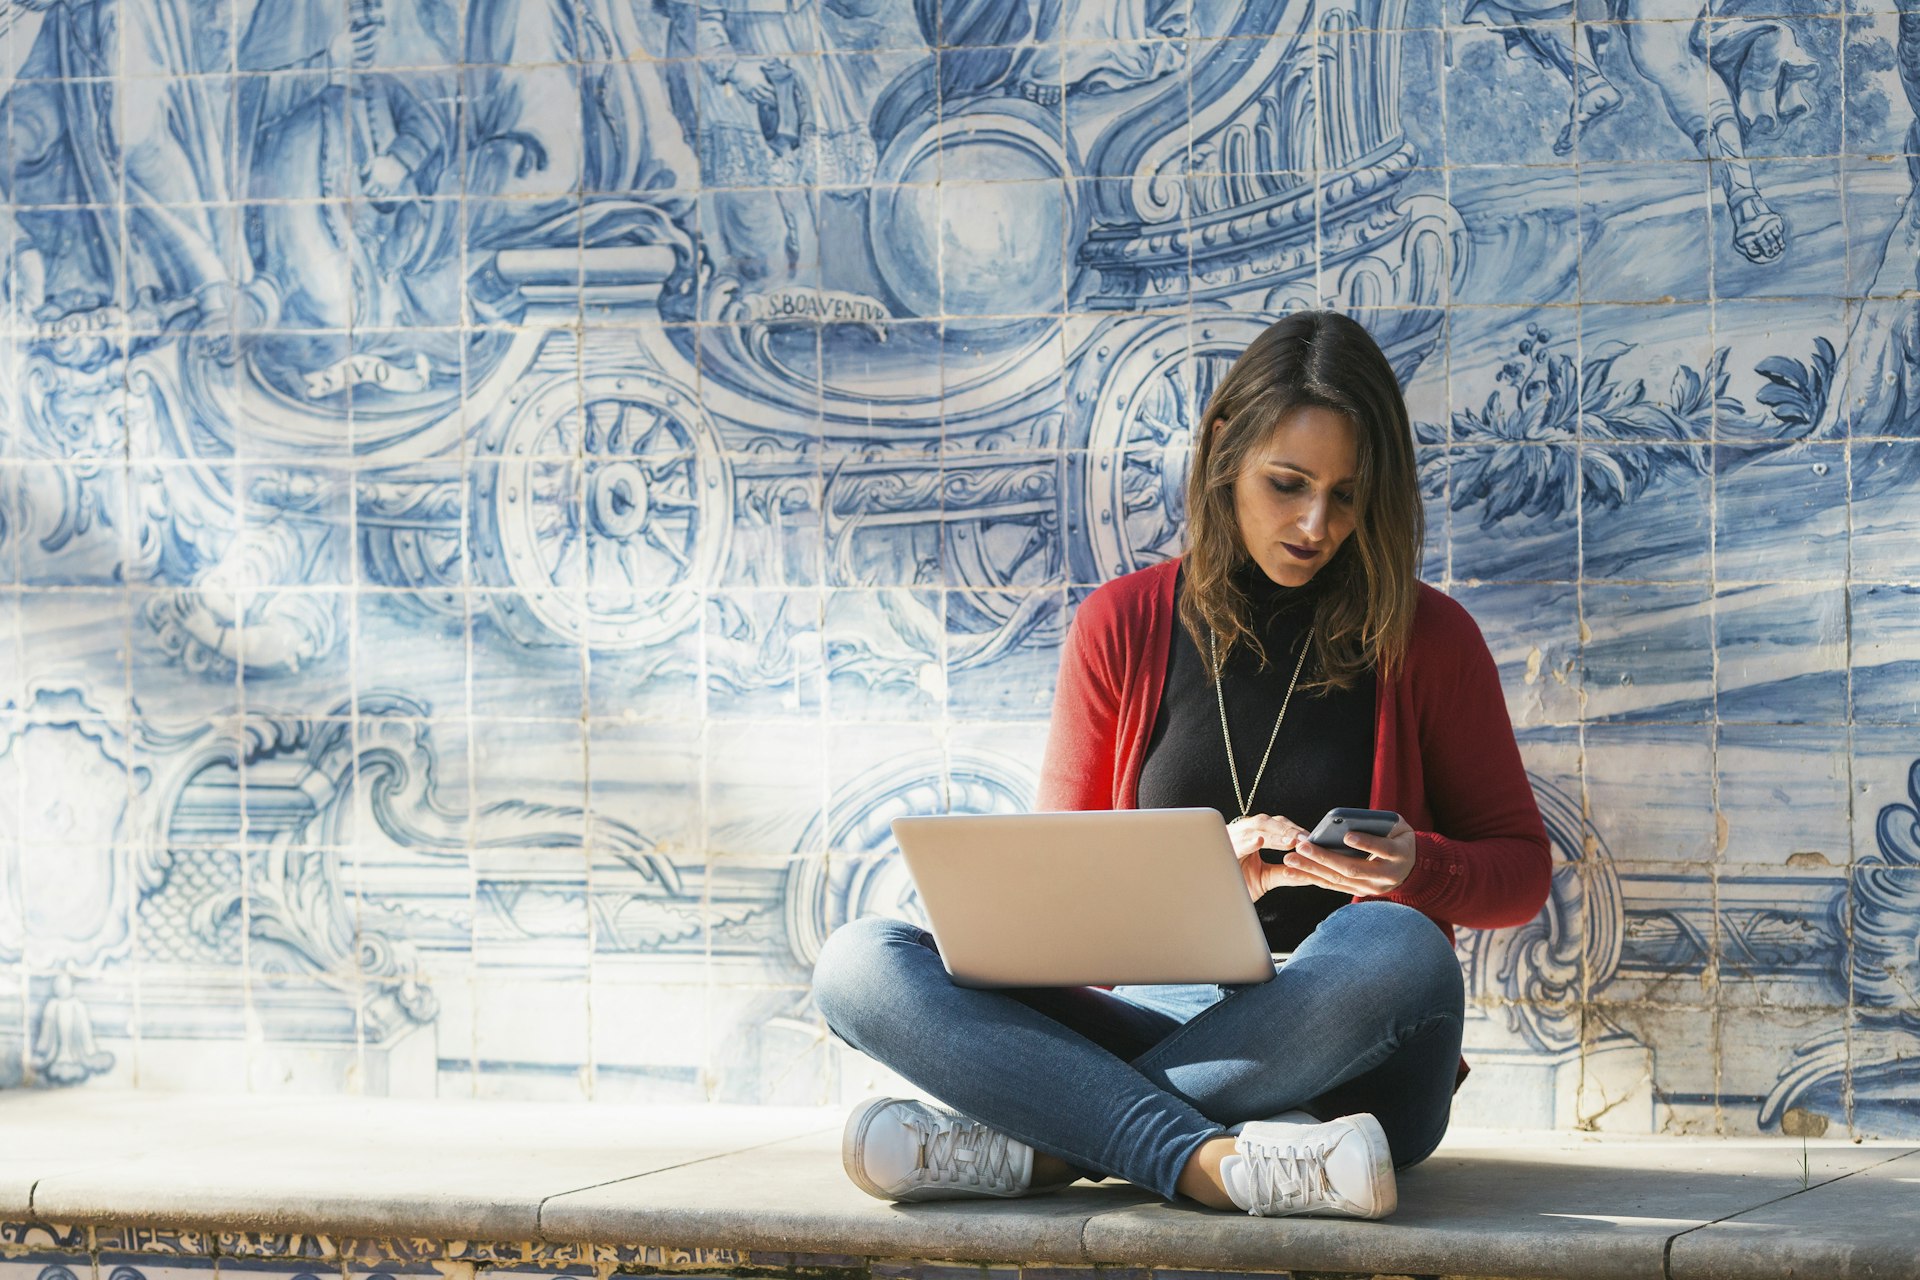 A woman sits cross-legged working on a laptop in front of a blue tiled wall with traditional designs